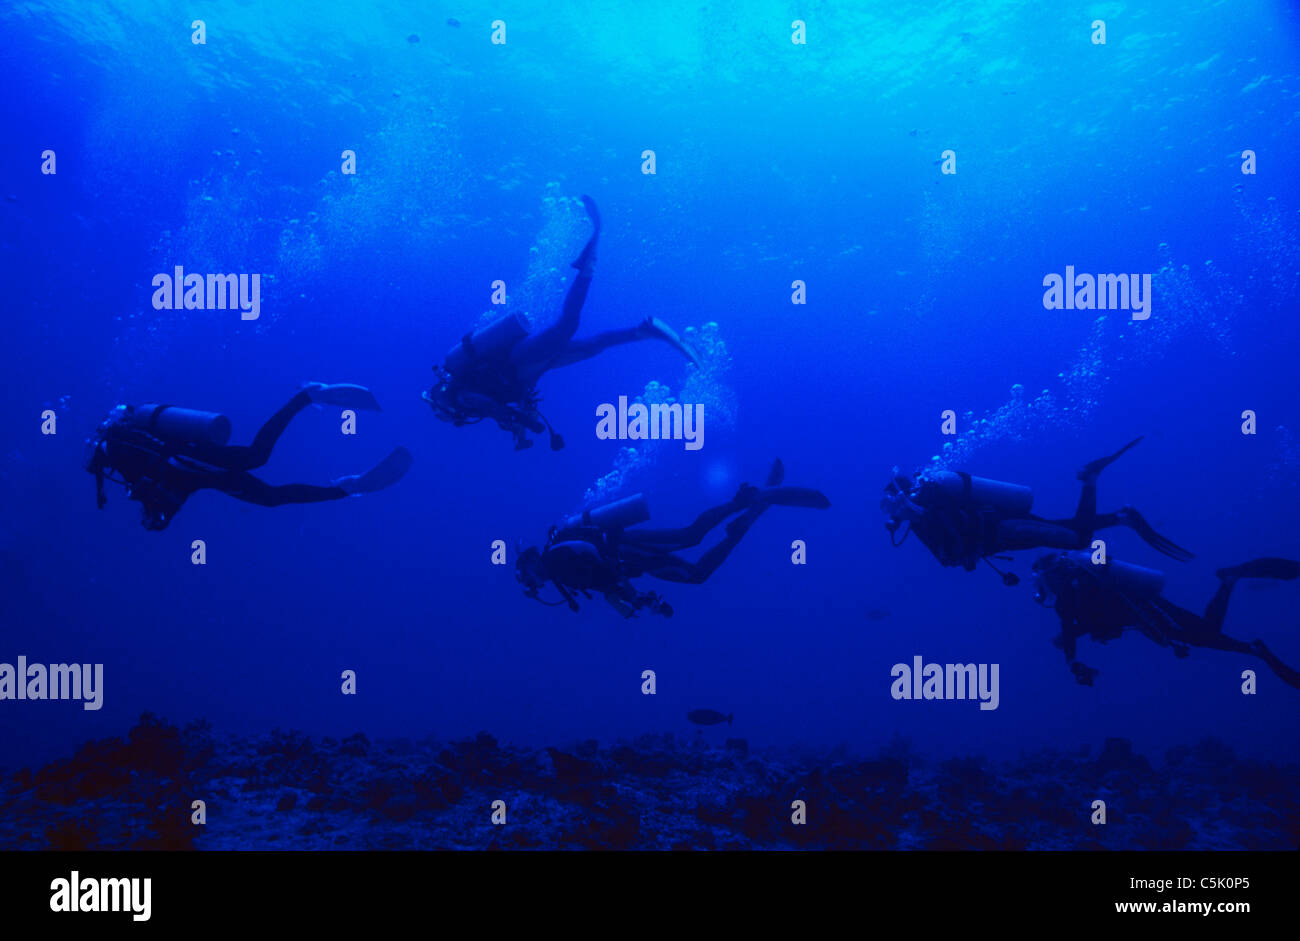 Group of Japanese scuba divers following each other in the Blue Corner, Republic of Palau, Micronesia Stock Photo